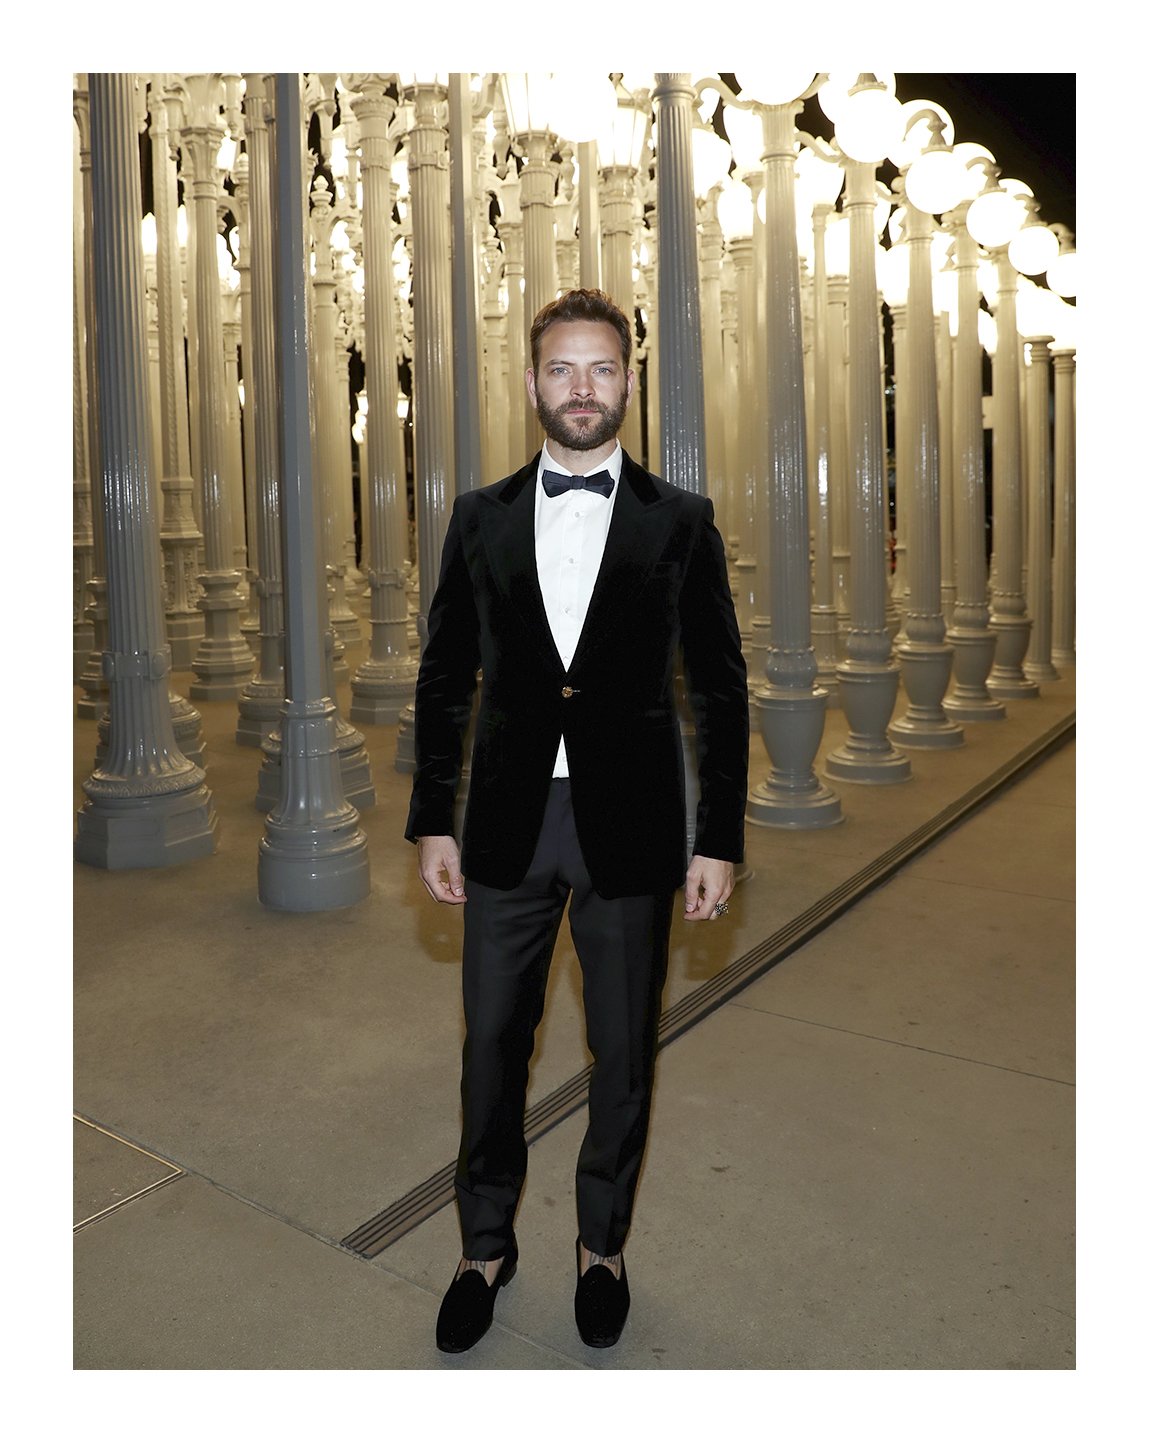 Tolkning børn vidne gucci on X: "To the Eighth annual Art+Film Gala, actor @AleBorghi_ wore a  velvet one button peak lapel formal jacket with a piqué evening shirt,  black trousers with grosgrain detail, satin bow